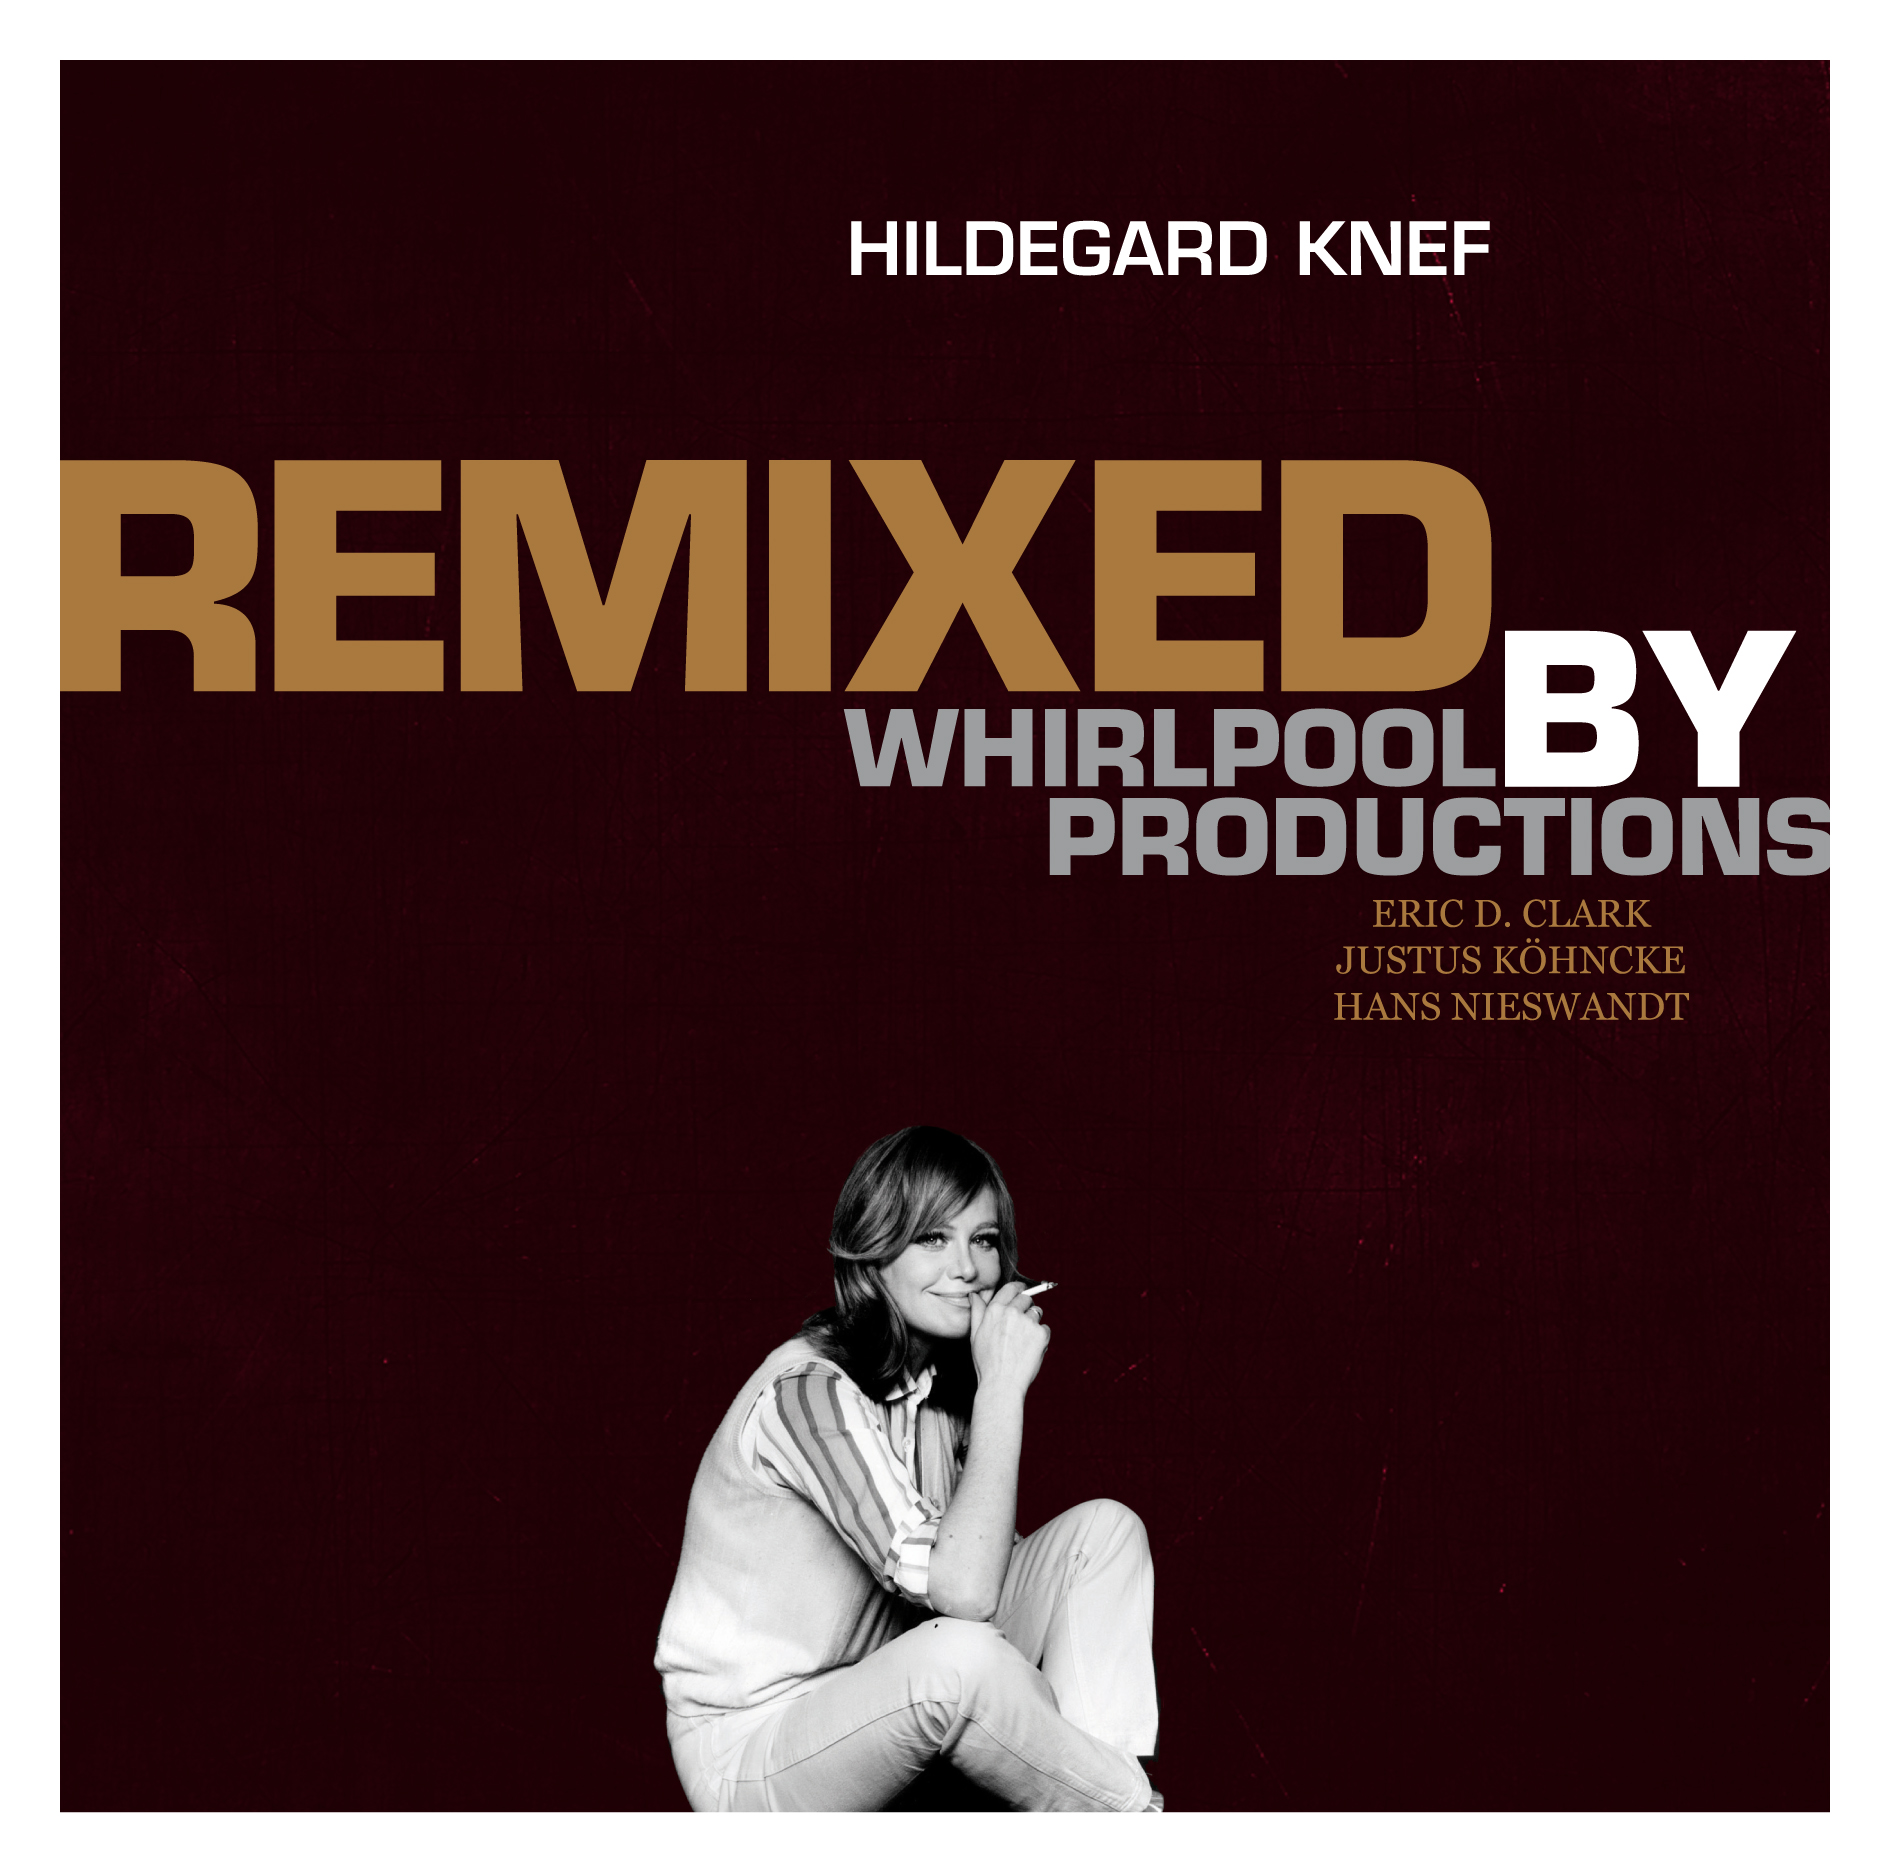 Hildegard Knef - Remixed by Whirlpool Productions (12" Vinyl)